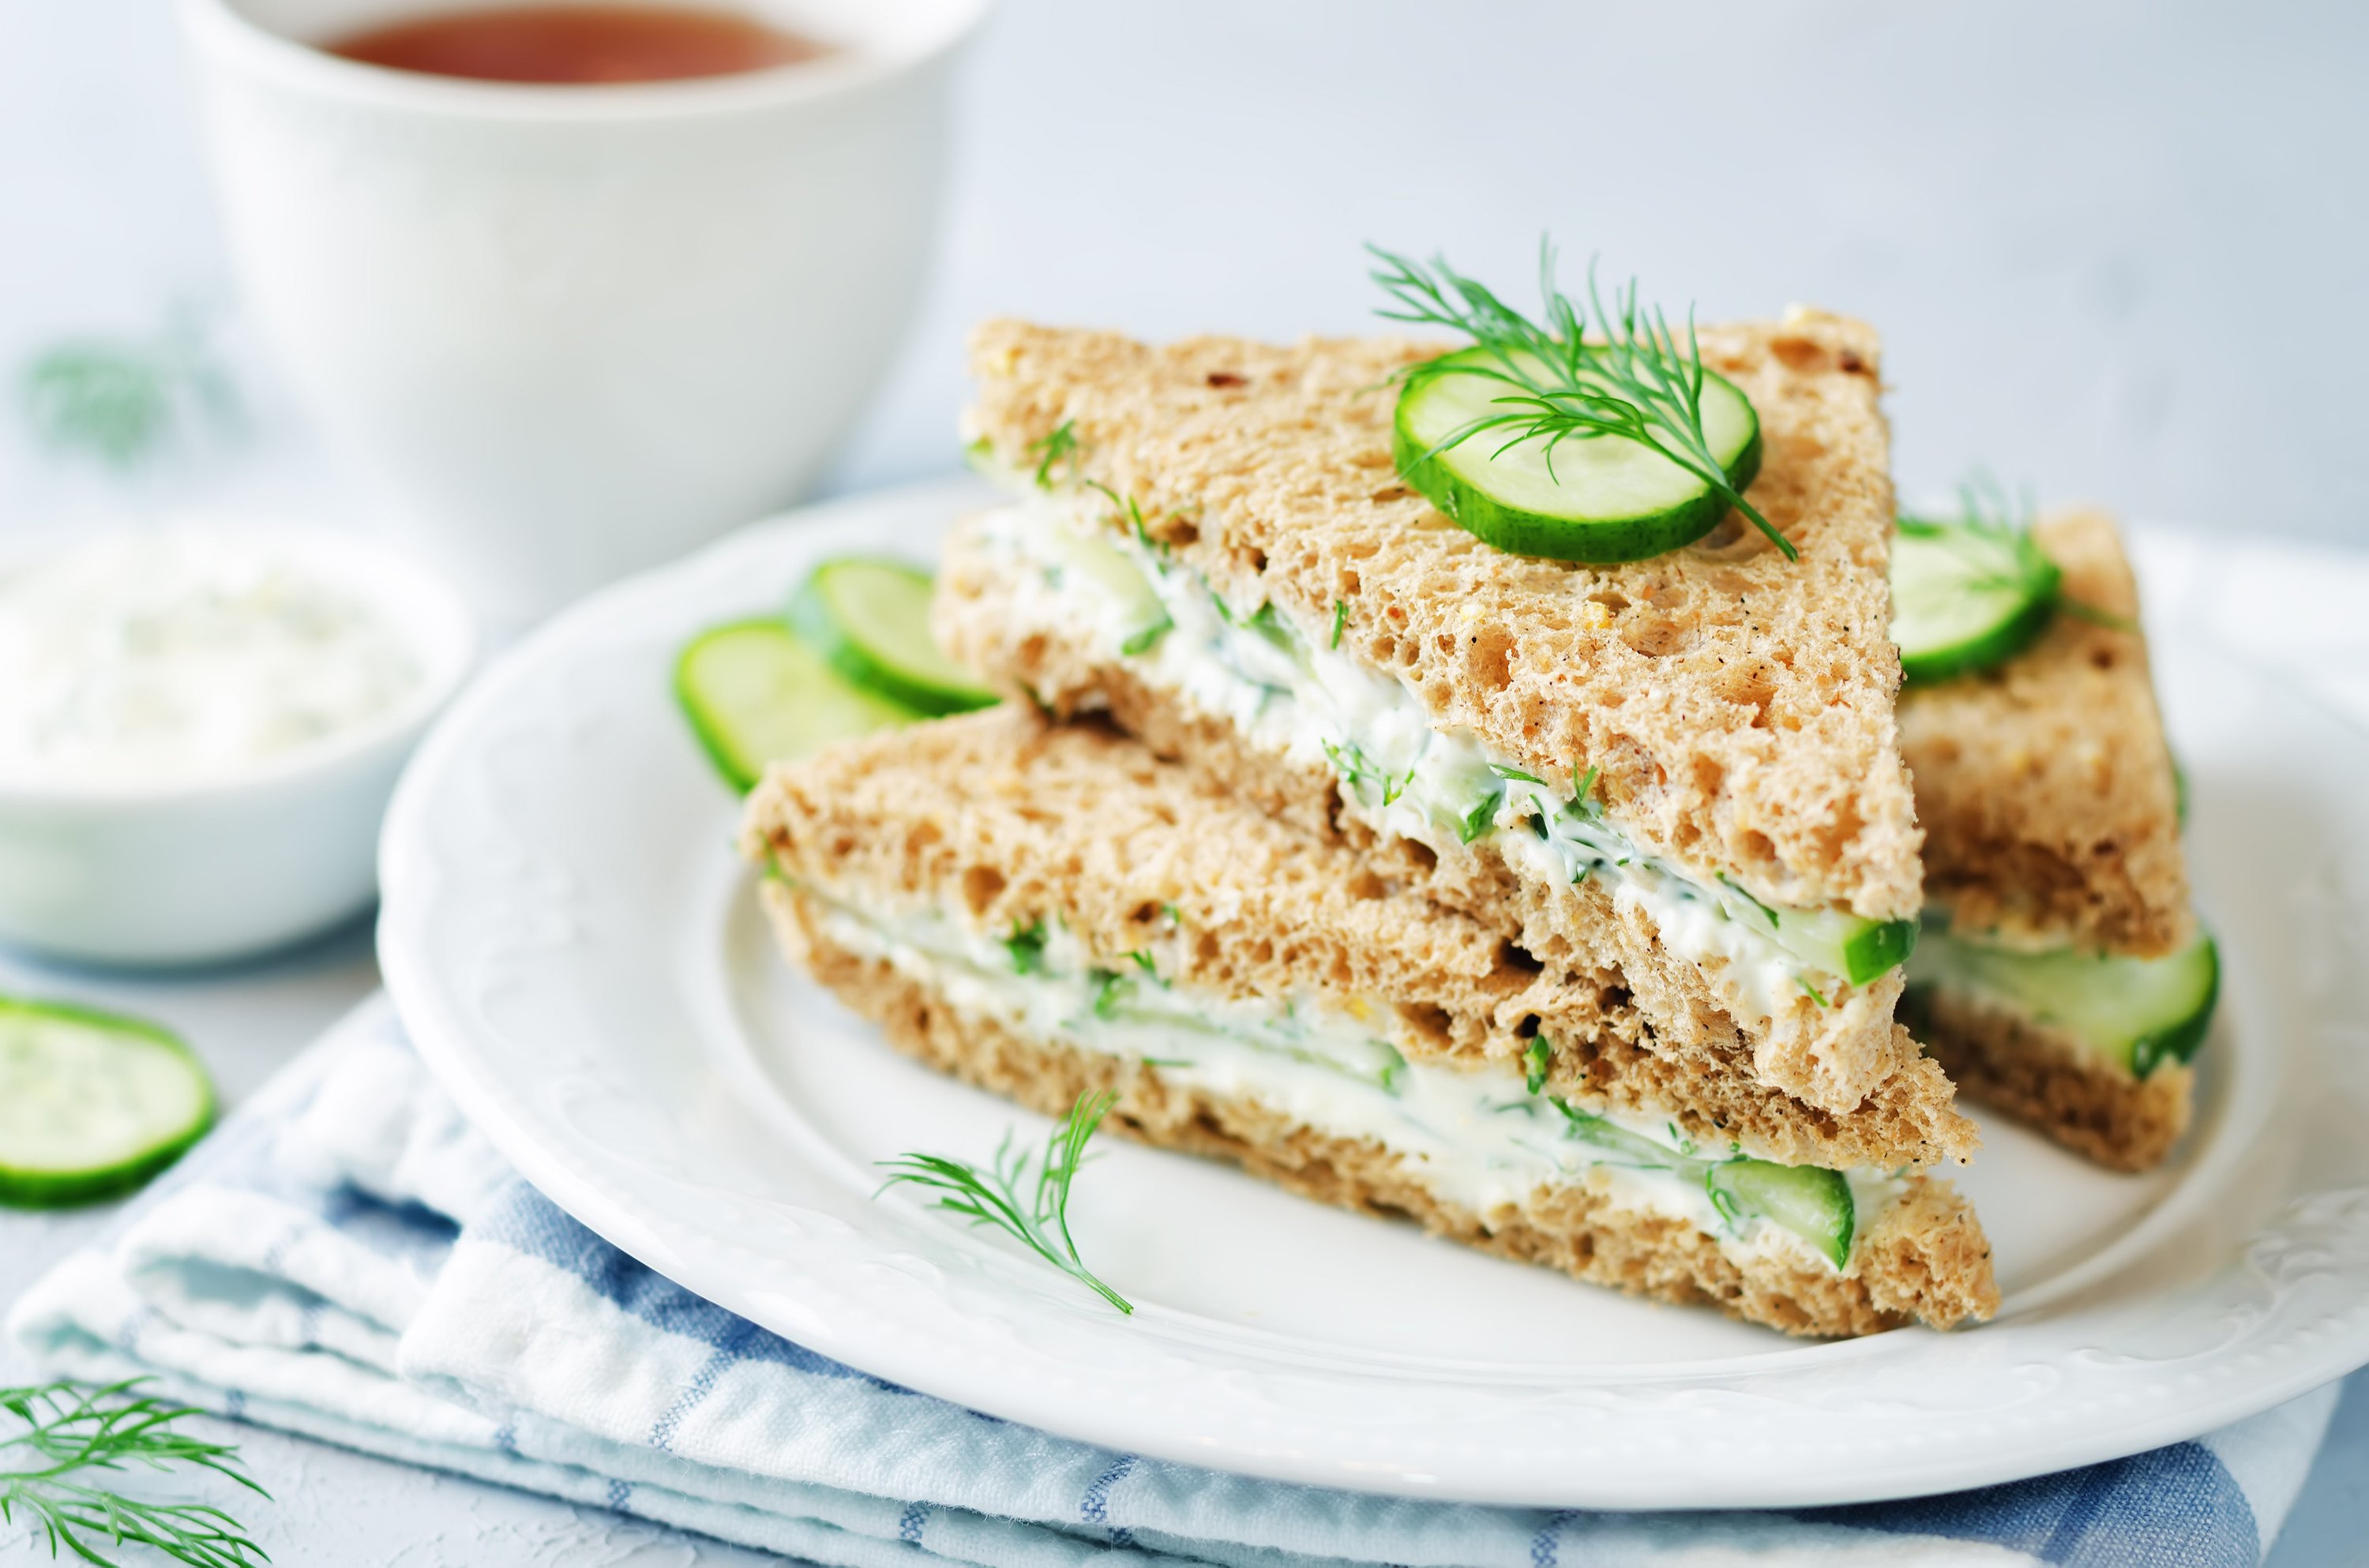 Some cucumber sandwiches with dill are a great snack for tea time. (Shutterstock Photo)